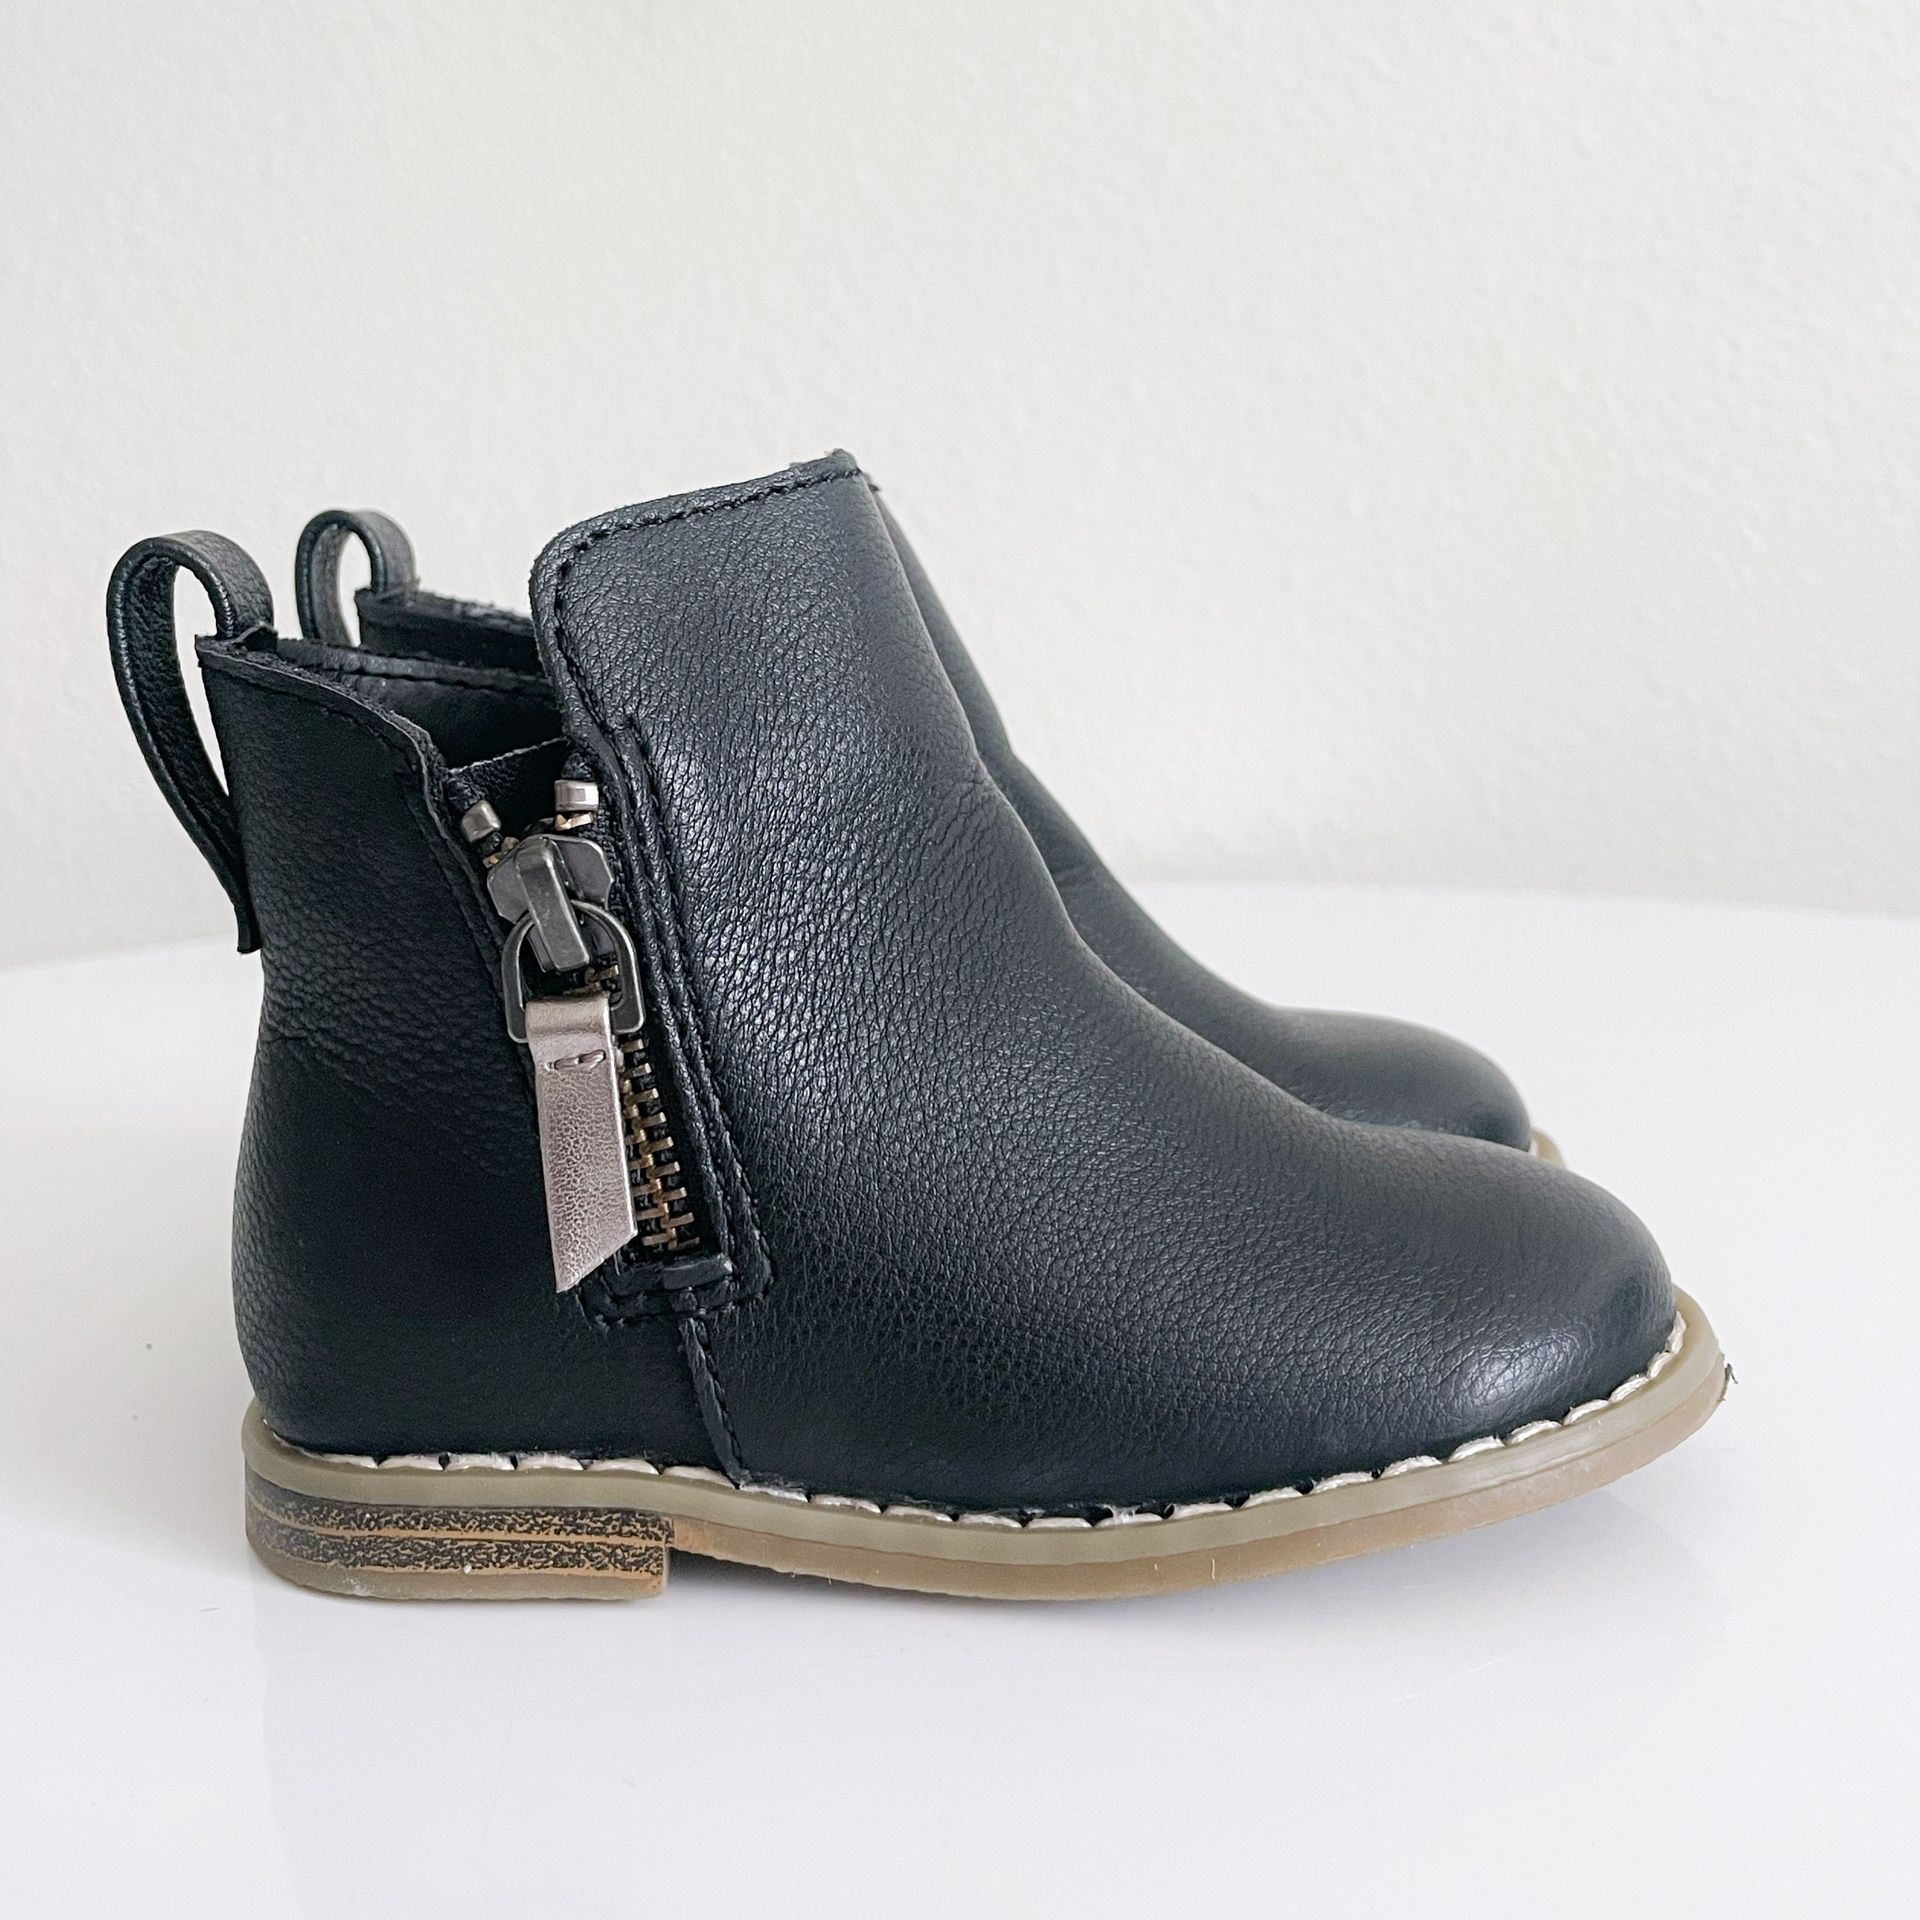 BABY GAP Faux Leather Moto Ankle Boots 6 toddler